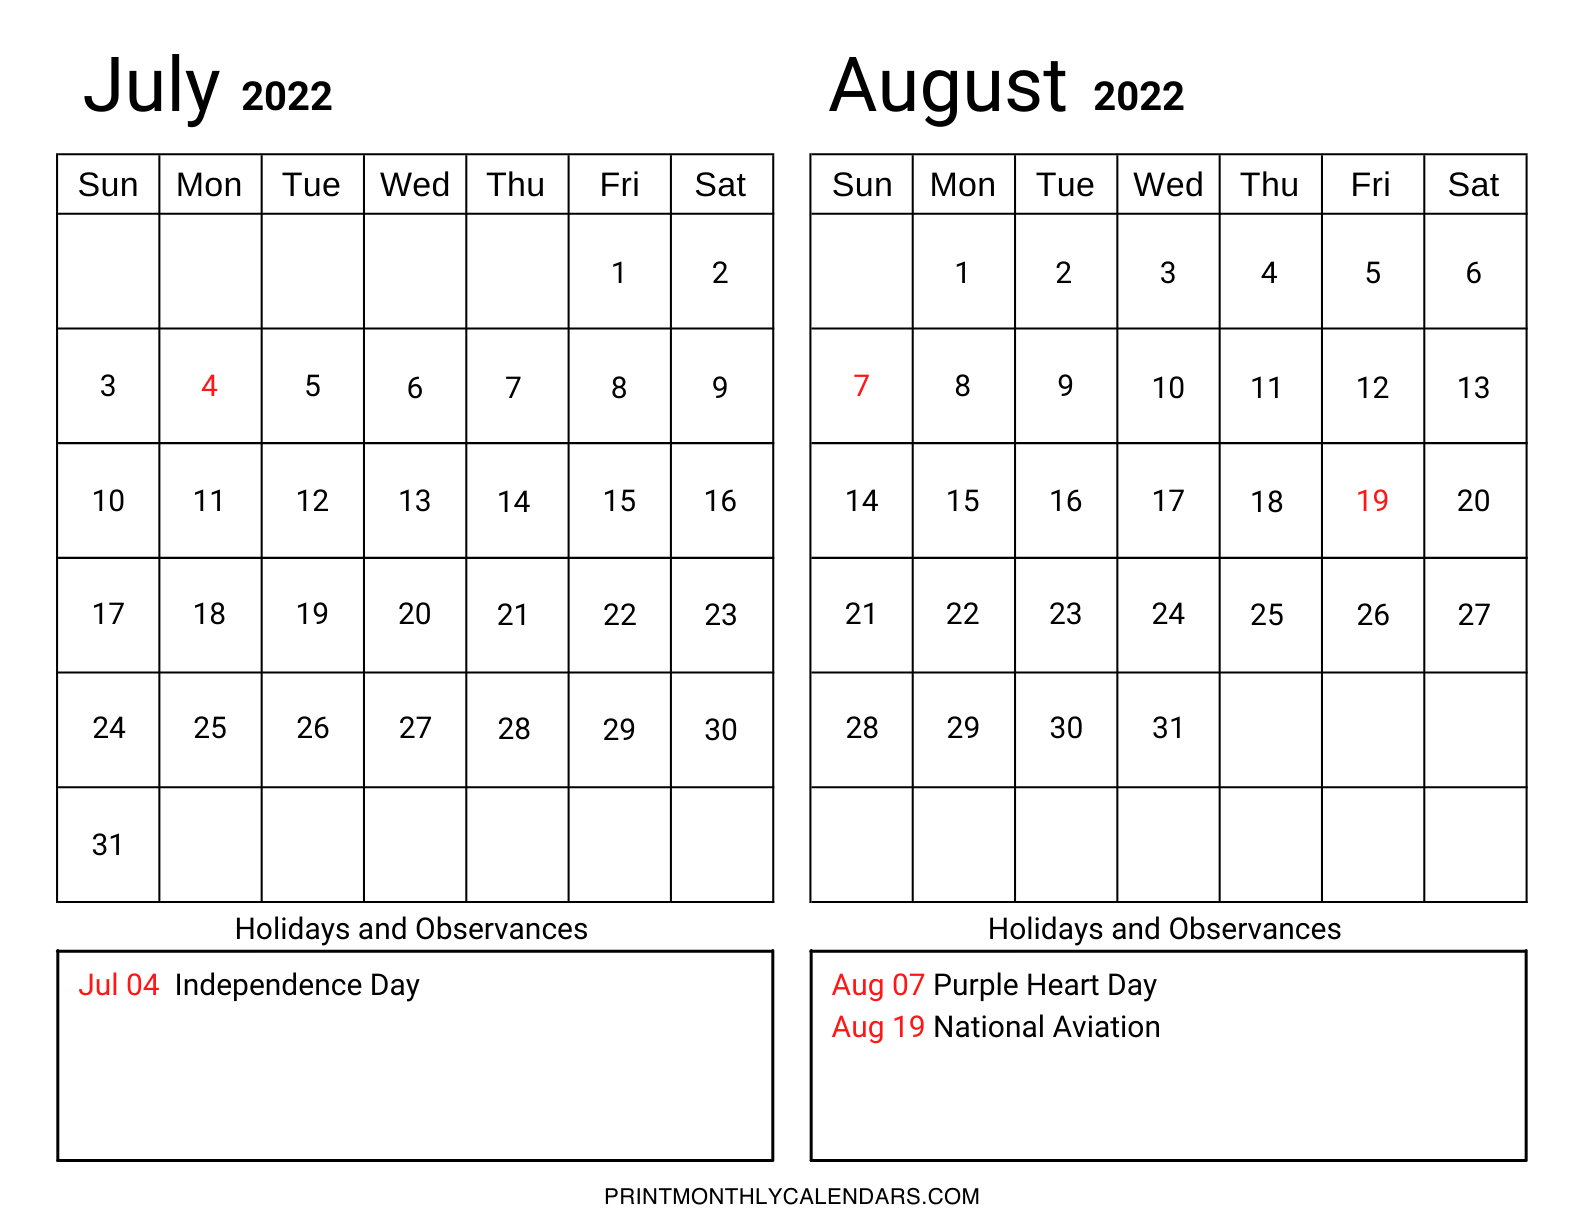 Calendar of US holidays for July and August 2022, including observances. At the bottom of the page, you'll find a list of federal and bank holidays. In the grid, holidays are denoted by the red color.